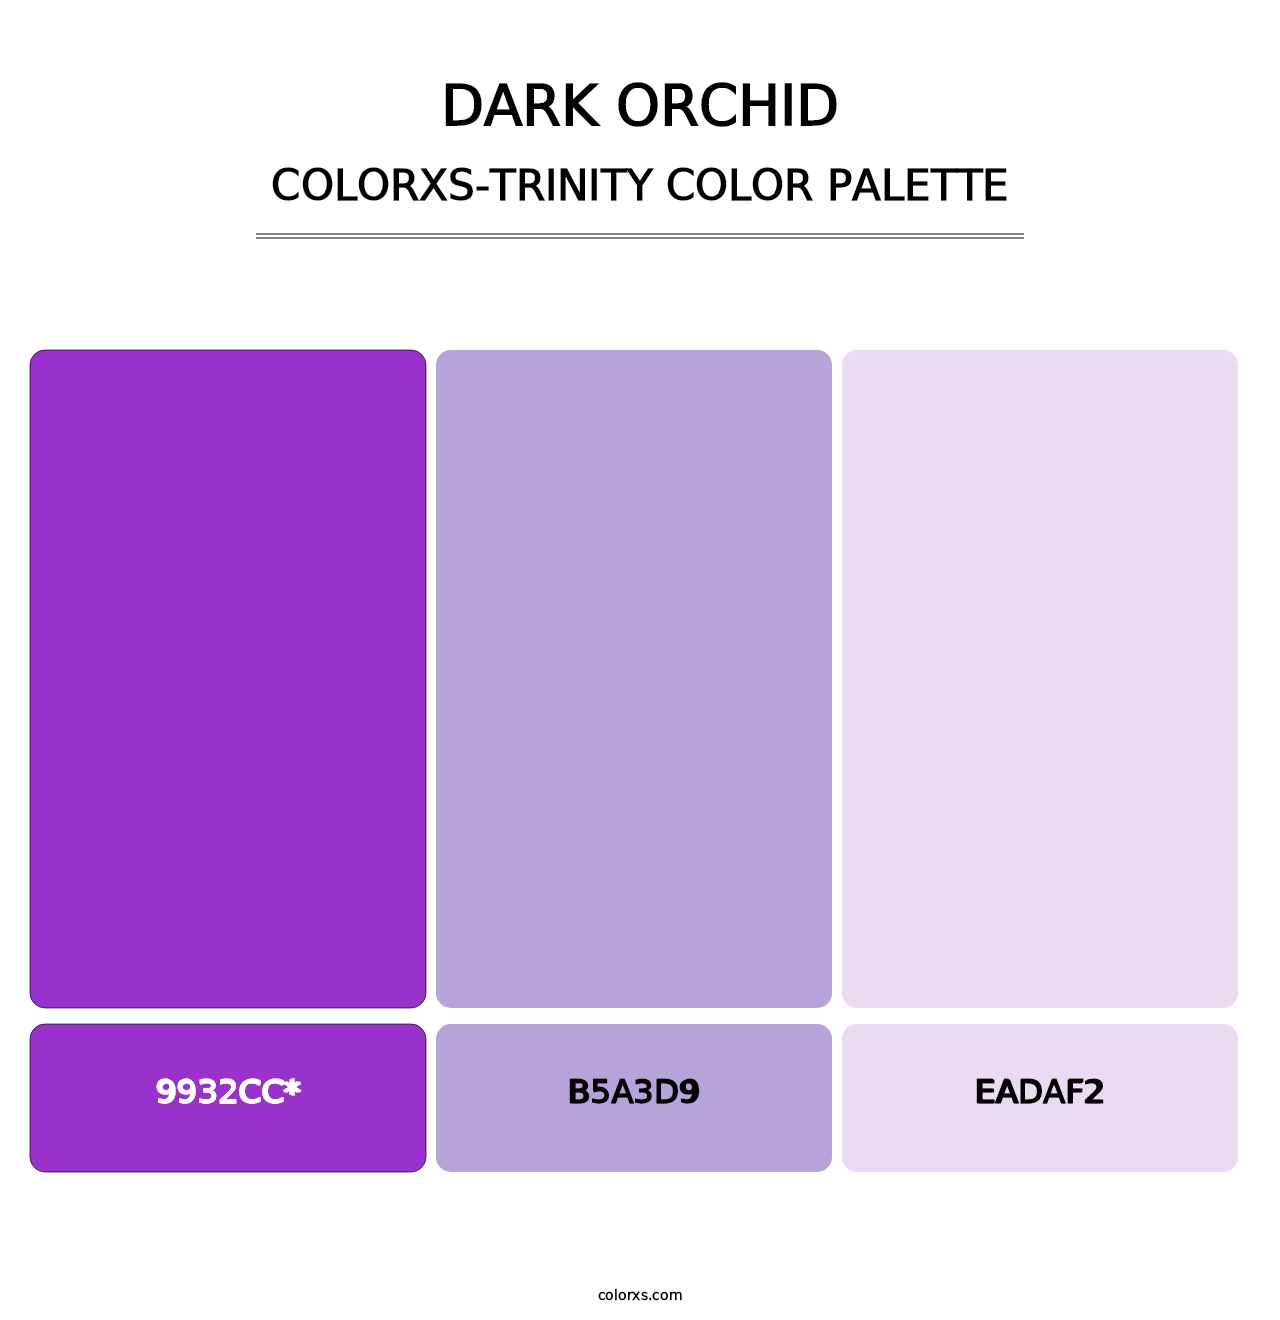 Dark Orchid - Colorxs Trinity Palette